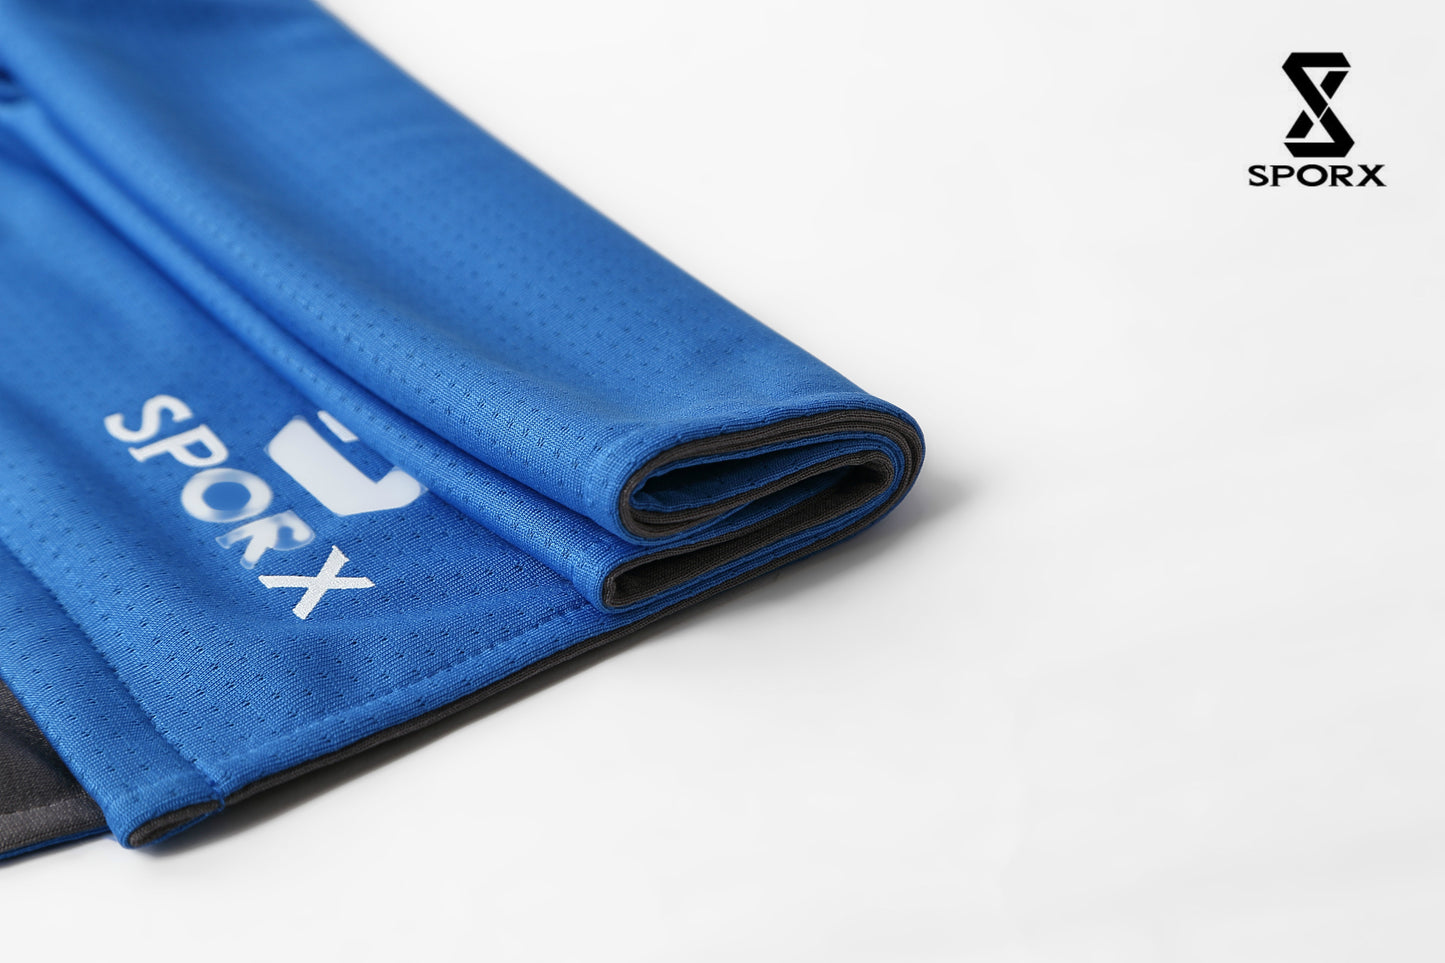 SPORX X Dry Double Layer Cooling Towel Royal Blue/Grey Maximum Instant Cooling UPF 50 Sun Protection, Yoga, Golf, Gym, Neck, Workout